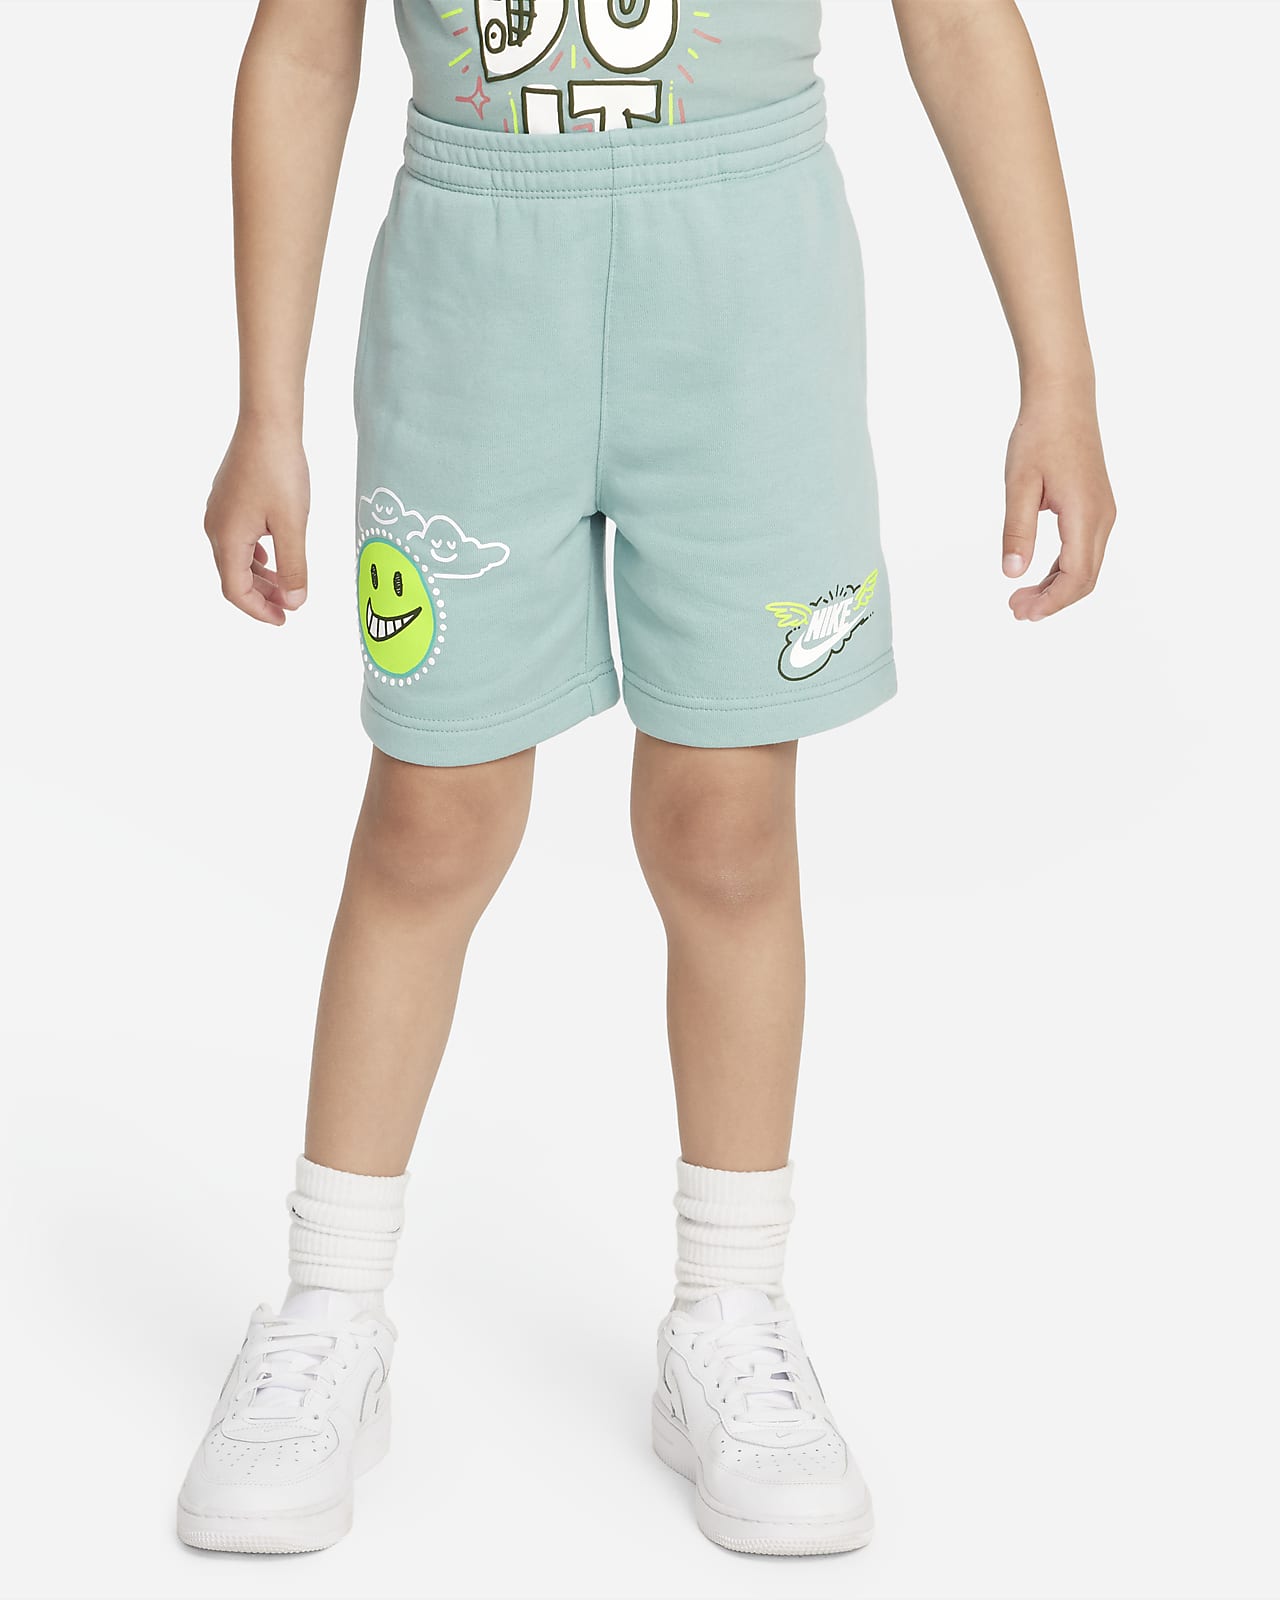 Nike Sportswear "Art of Play" French Terry Shorts Little Kids Shorts